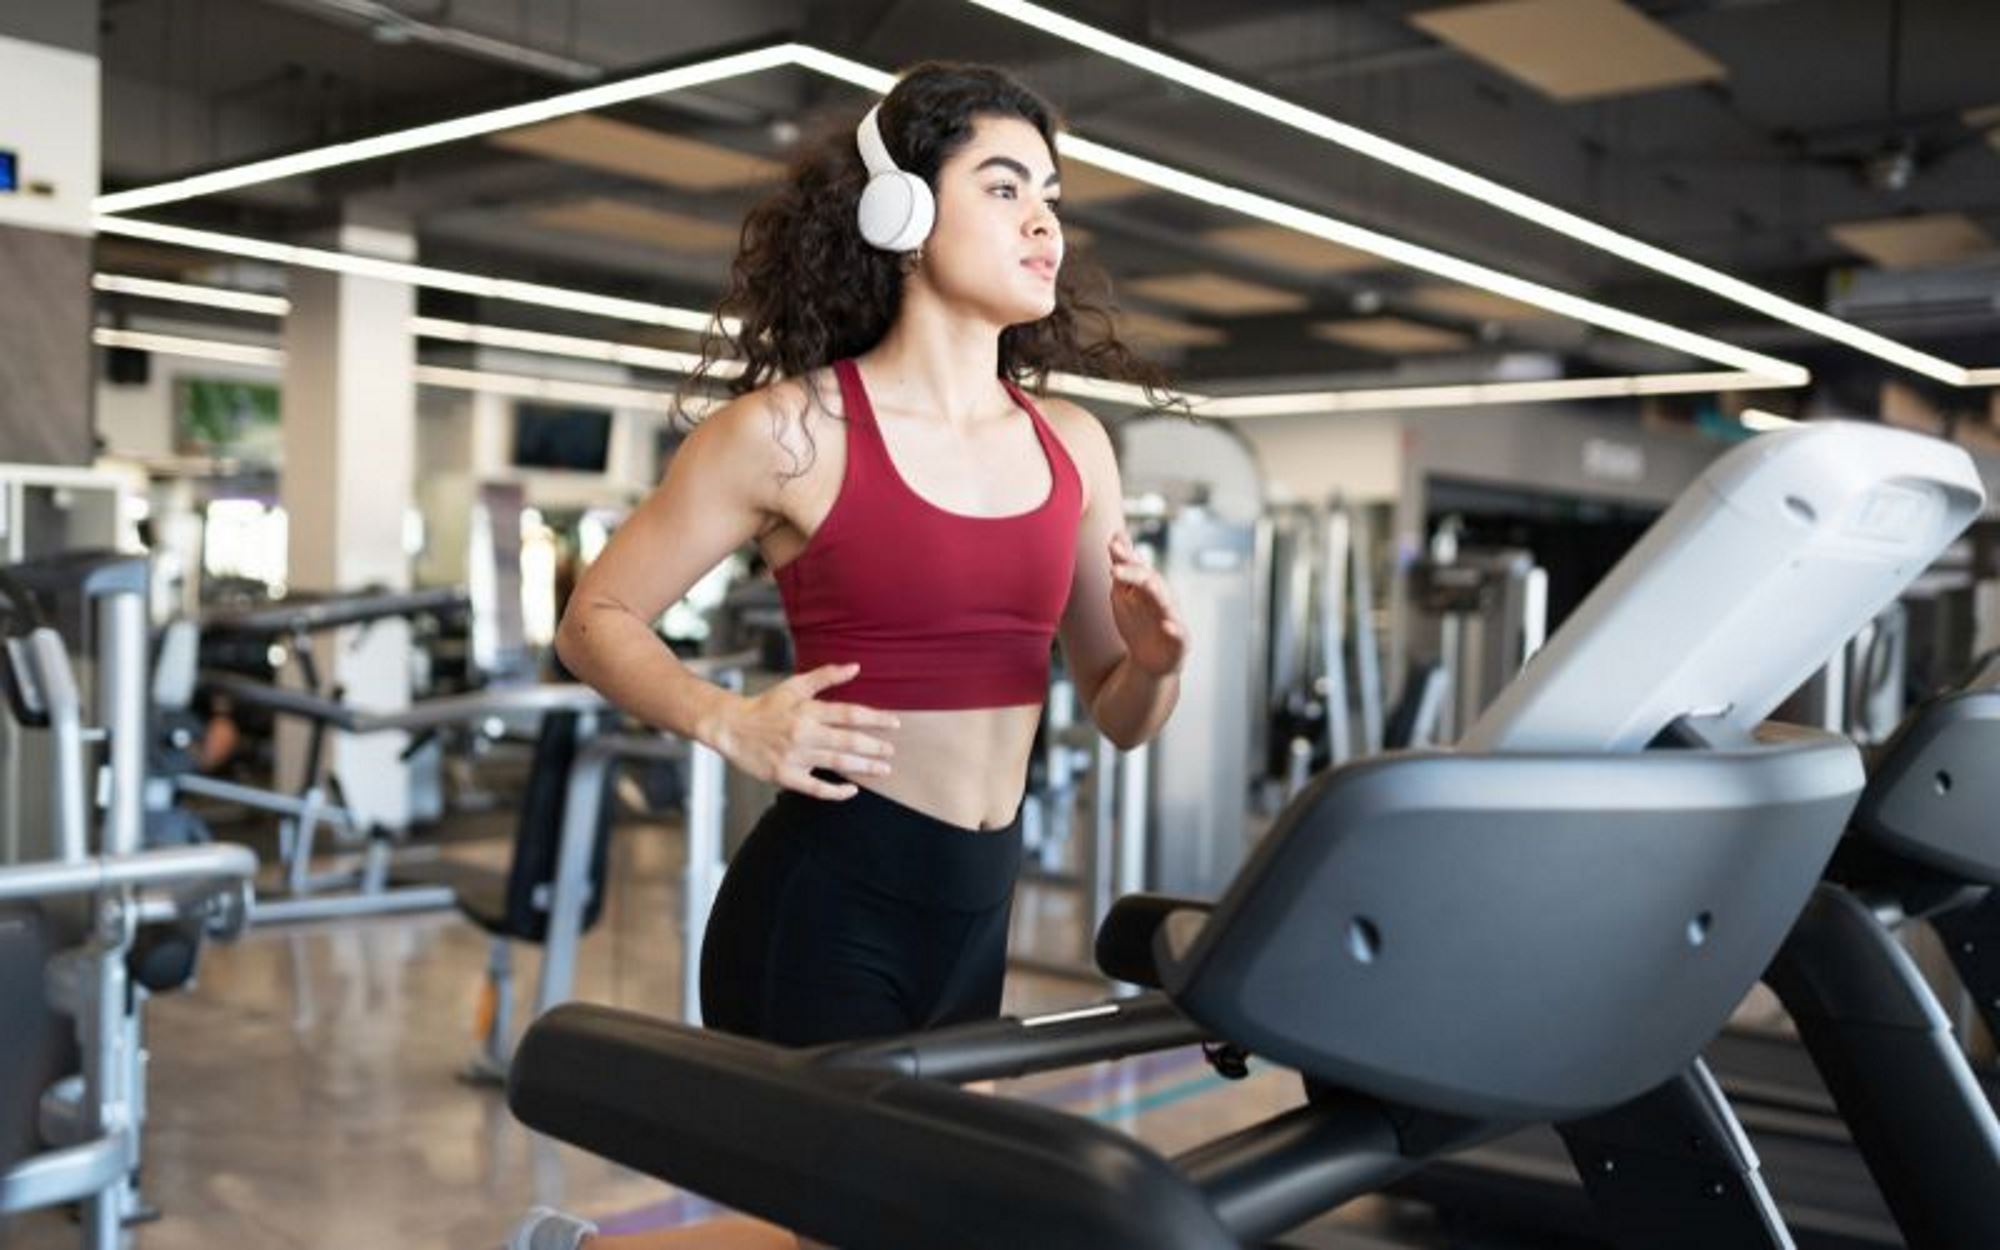 A woman exercising while listening to music on her headphones. Running on a treadmill at the gym.